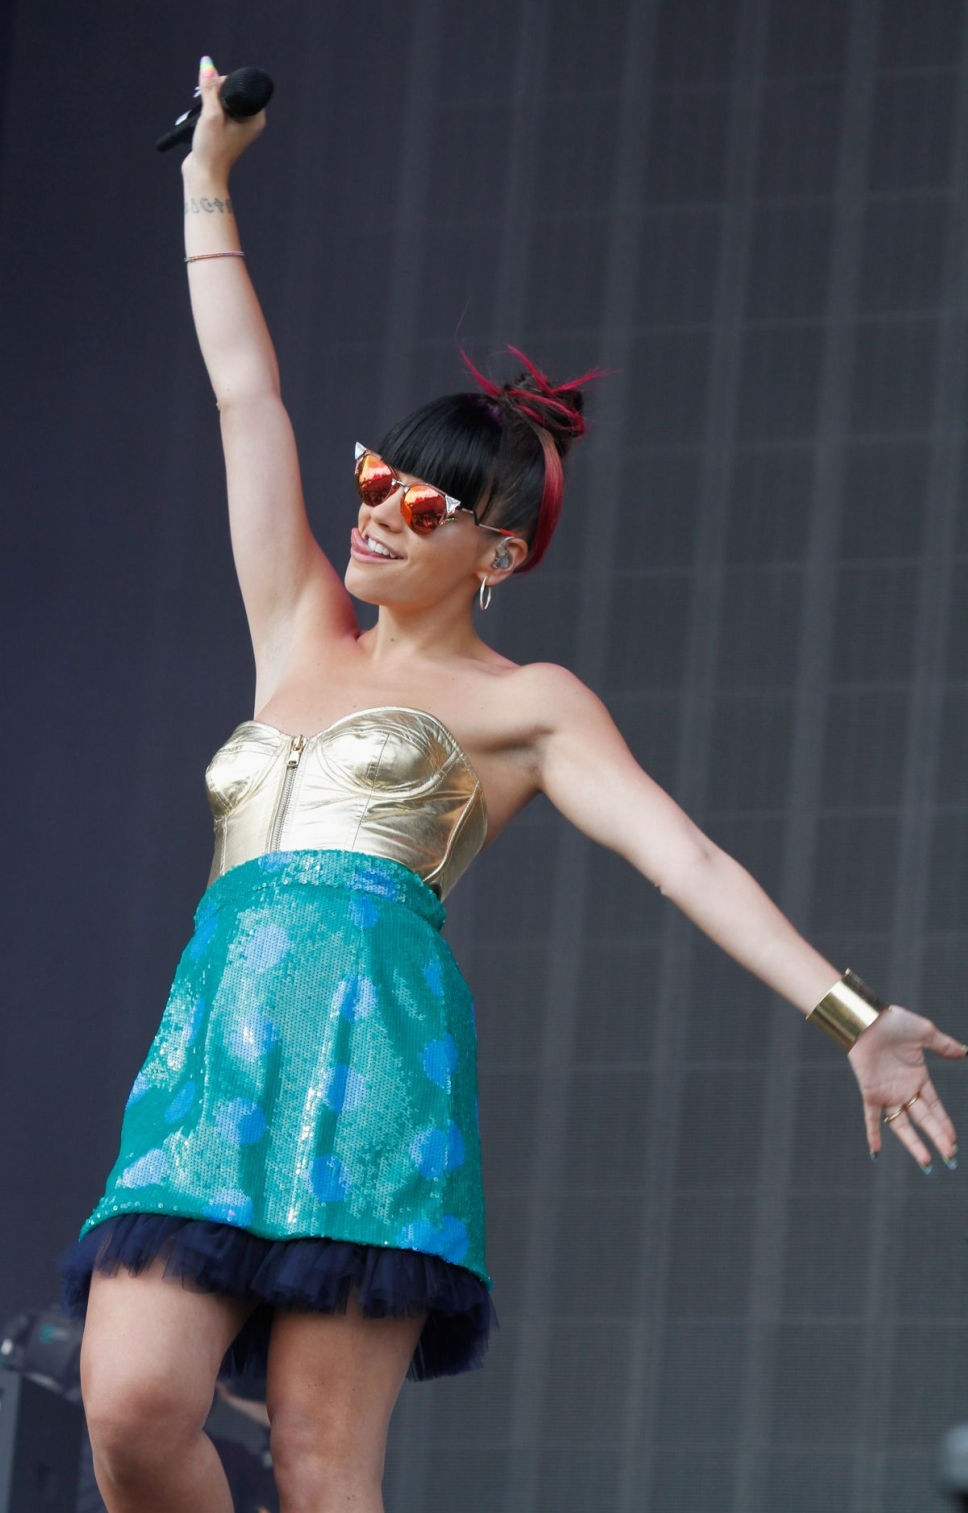 Lily Allen Pictures Hotness Rating 9 14 10